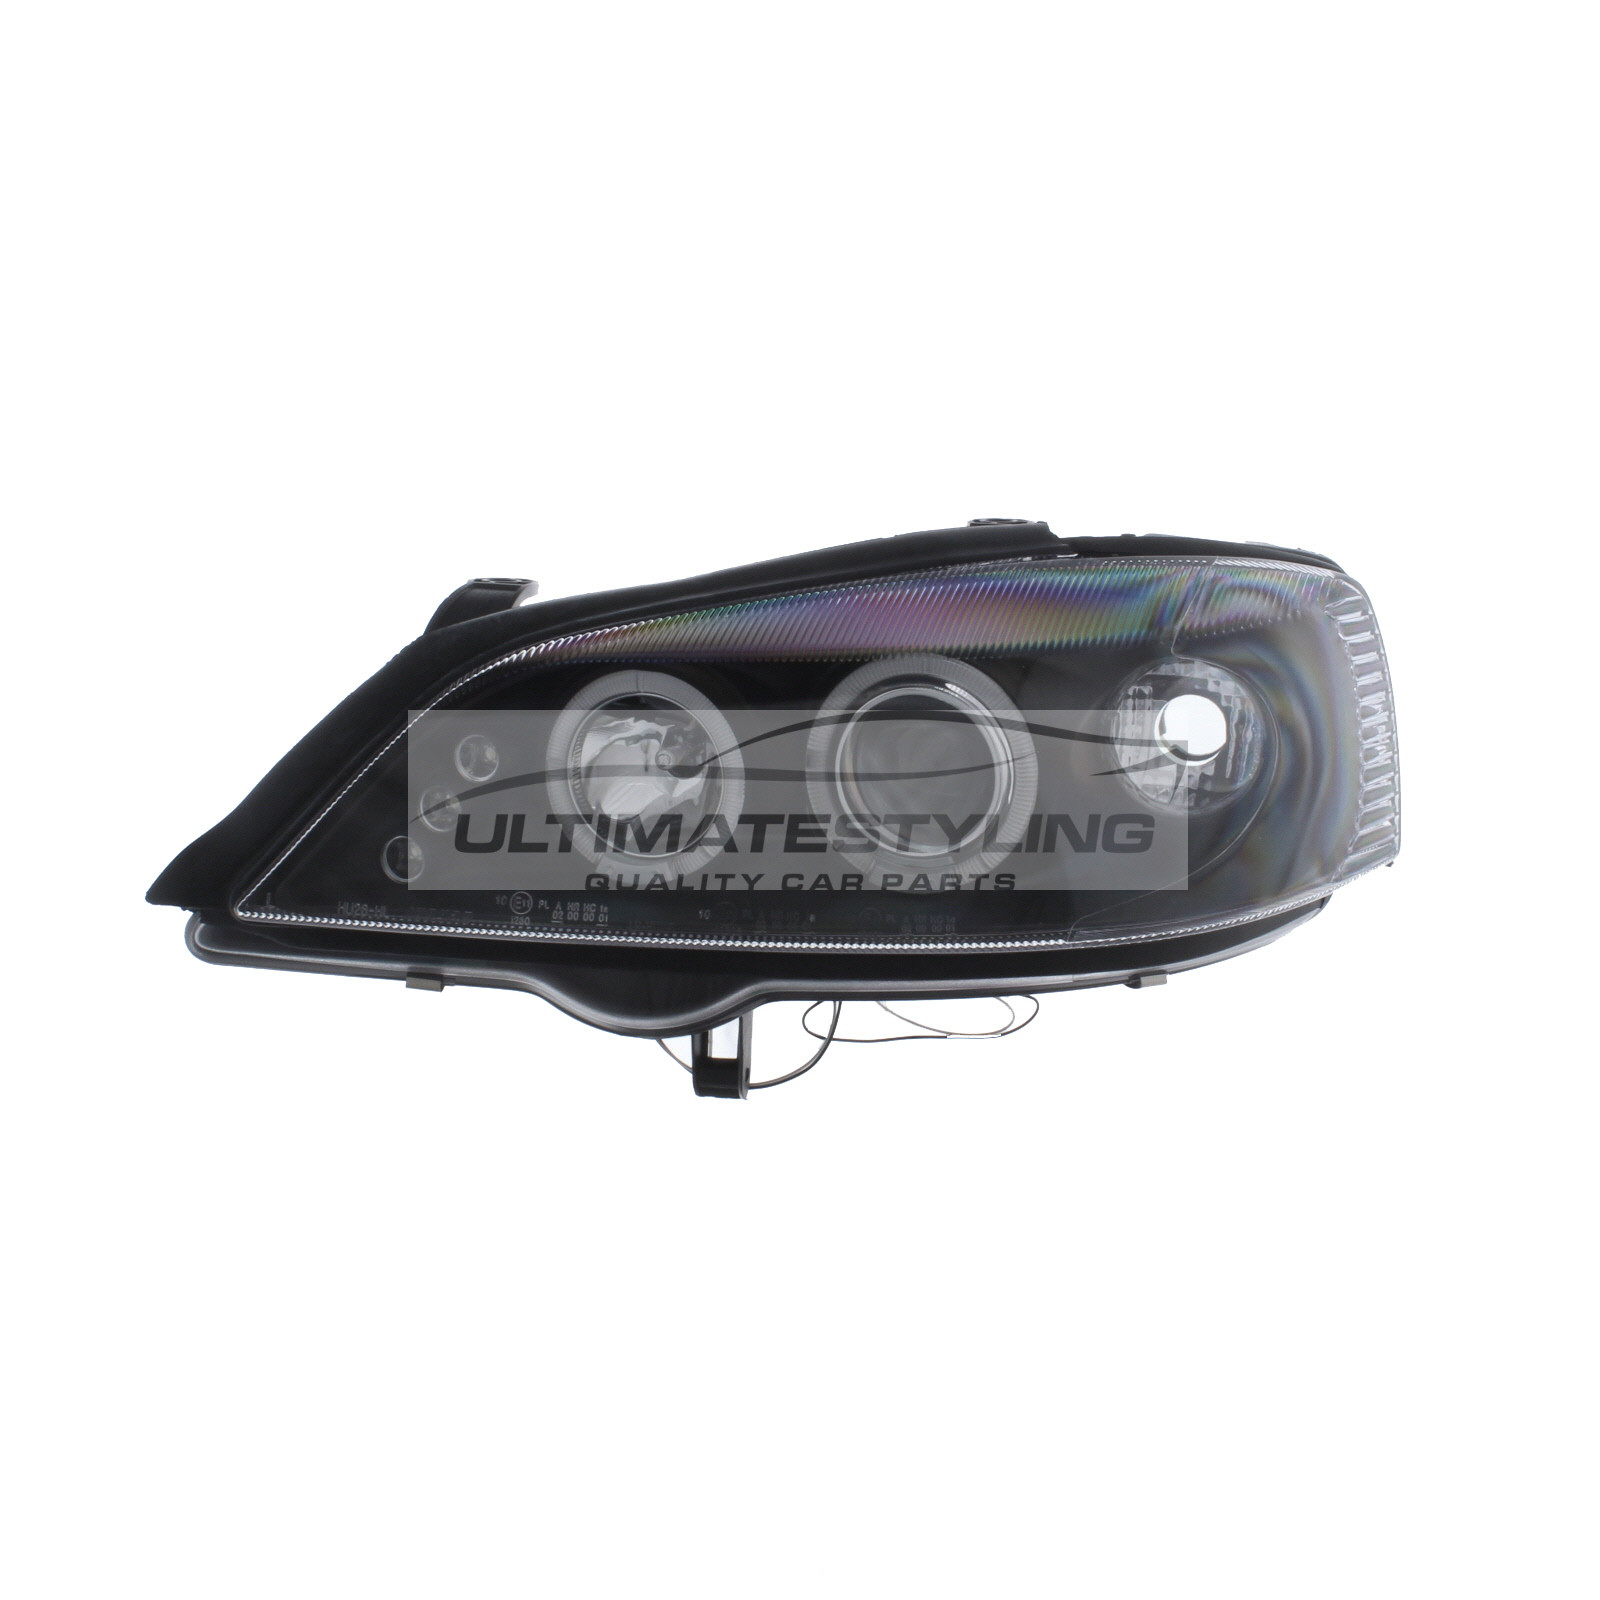 Vauxhall Astra Mk4 1998-2004 Upgrade Headlights Black Inner LED Twin Angel Eyes Halo and DRL Projector Xenon Look